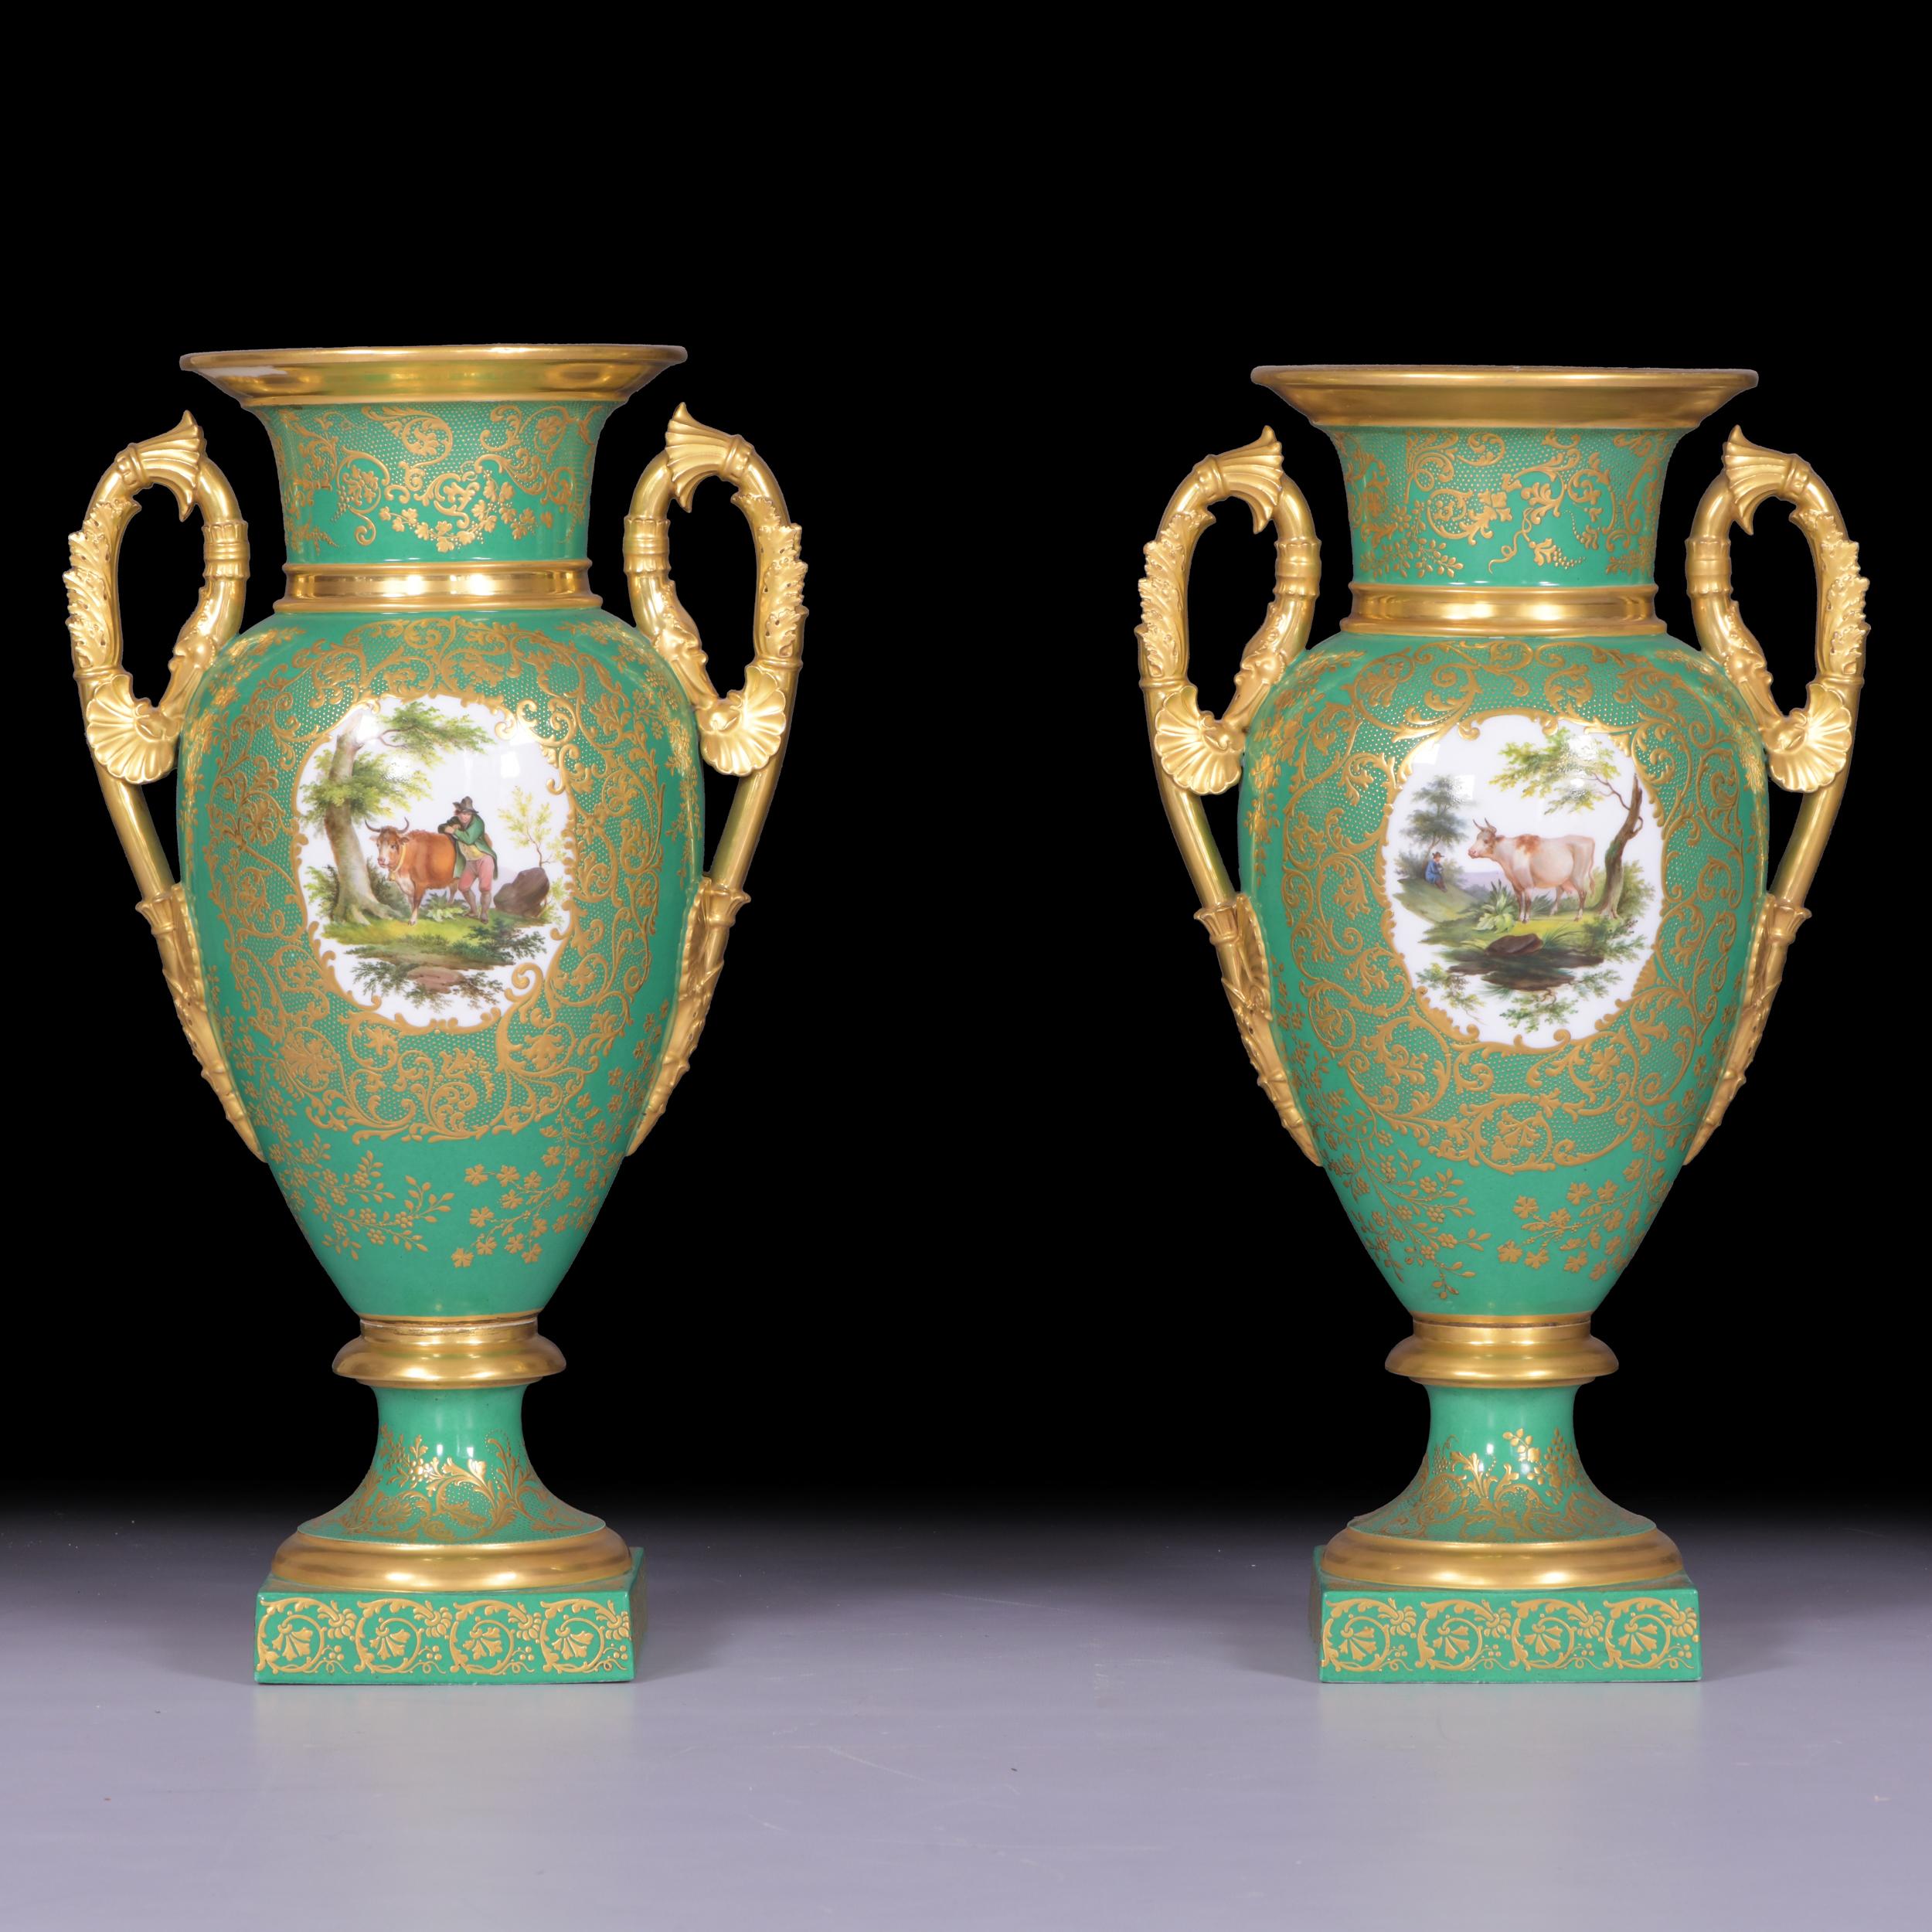 Empire Pair of 19th Century French Parisian Vases For Sale